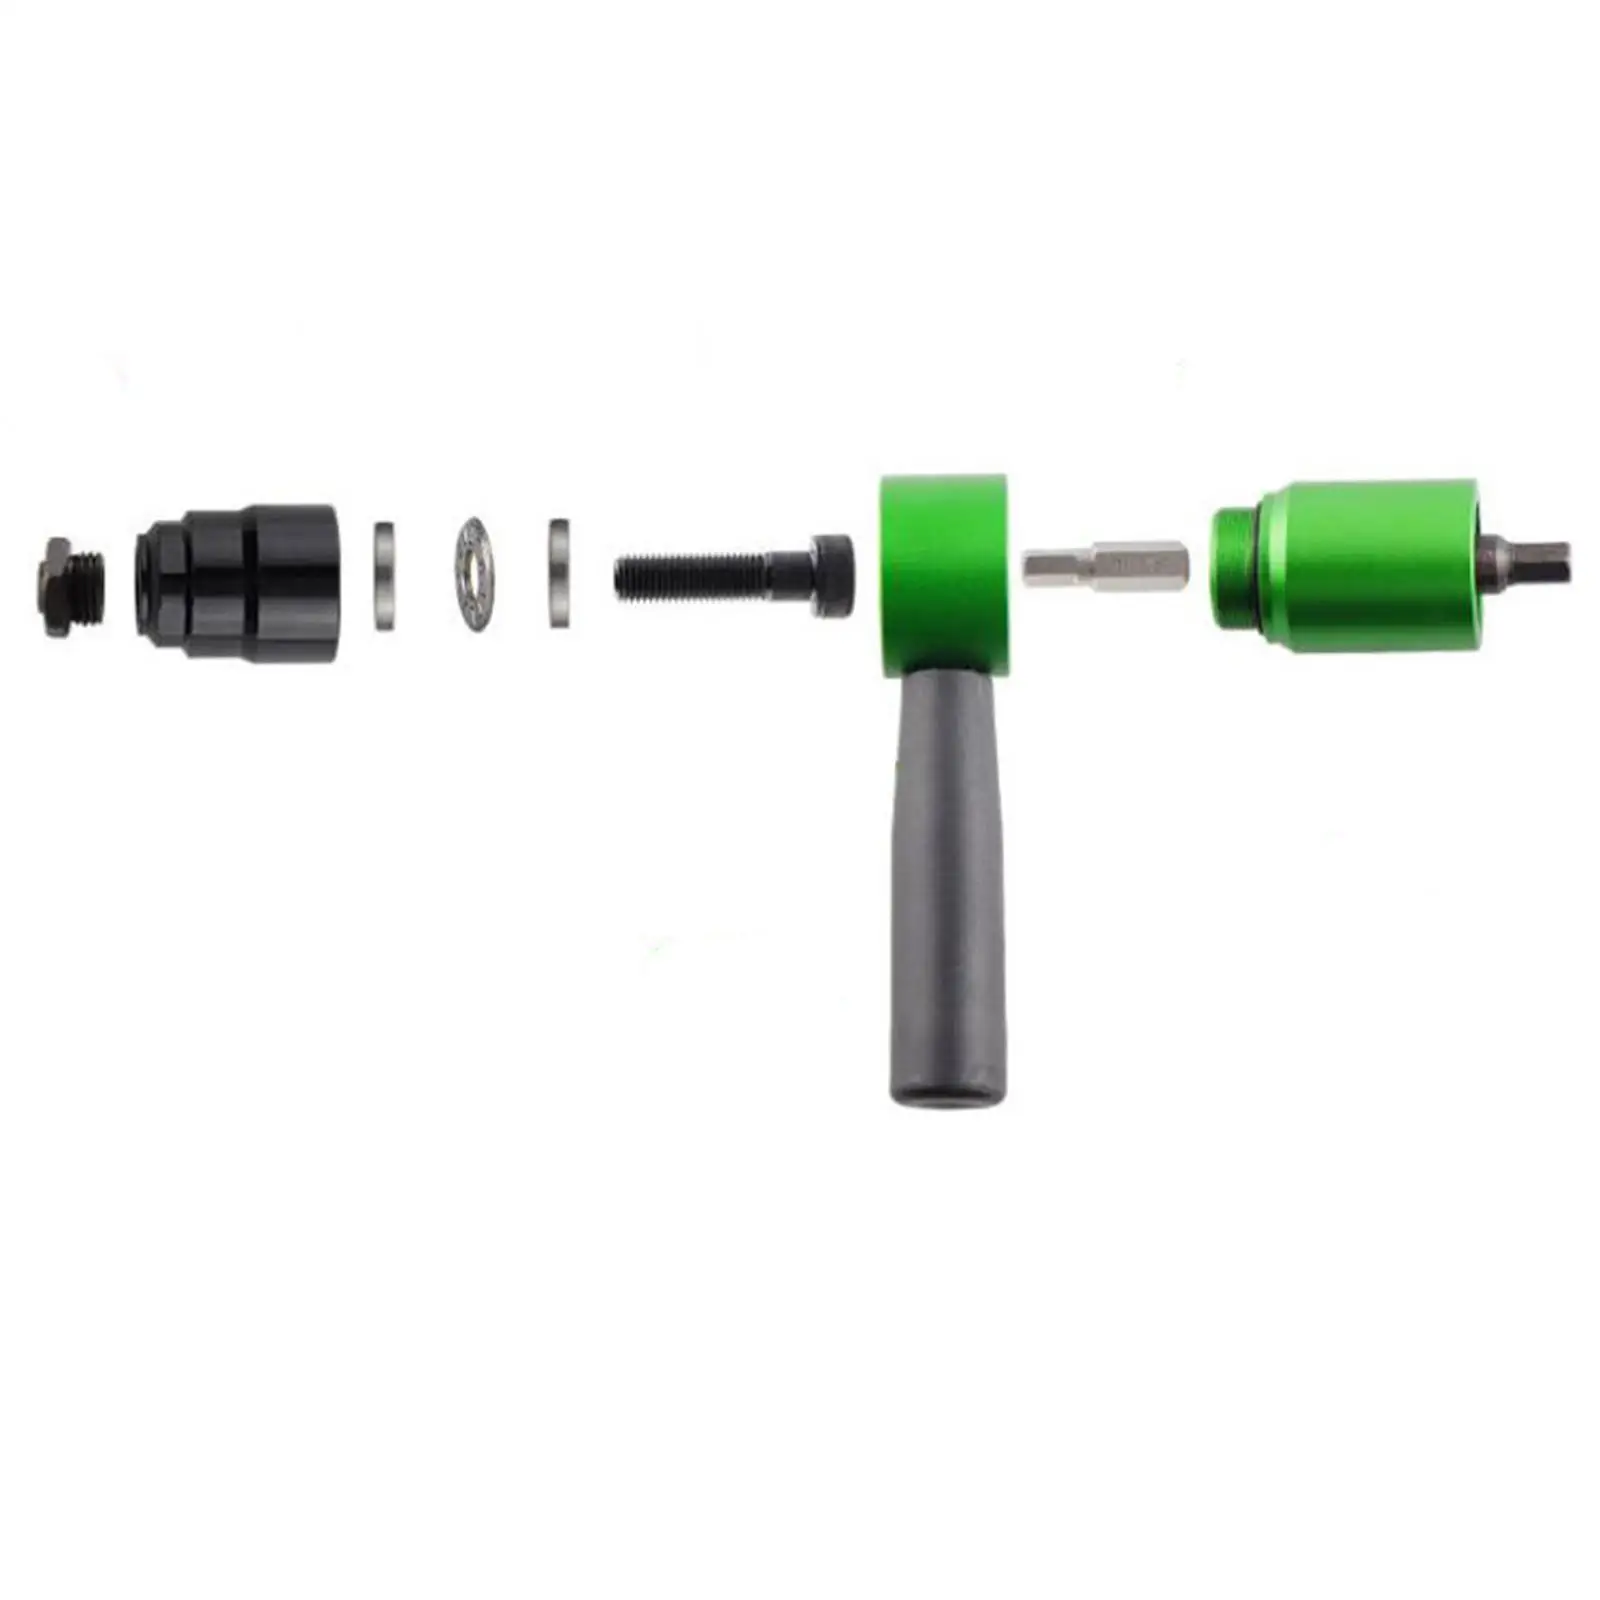 Electric Rivet Nut Drill Adaptor Set Sturdy Convenient Professional with Handle Grip for Cordless Electric Drill Rivet Head